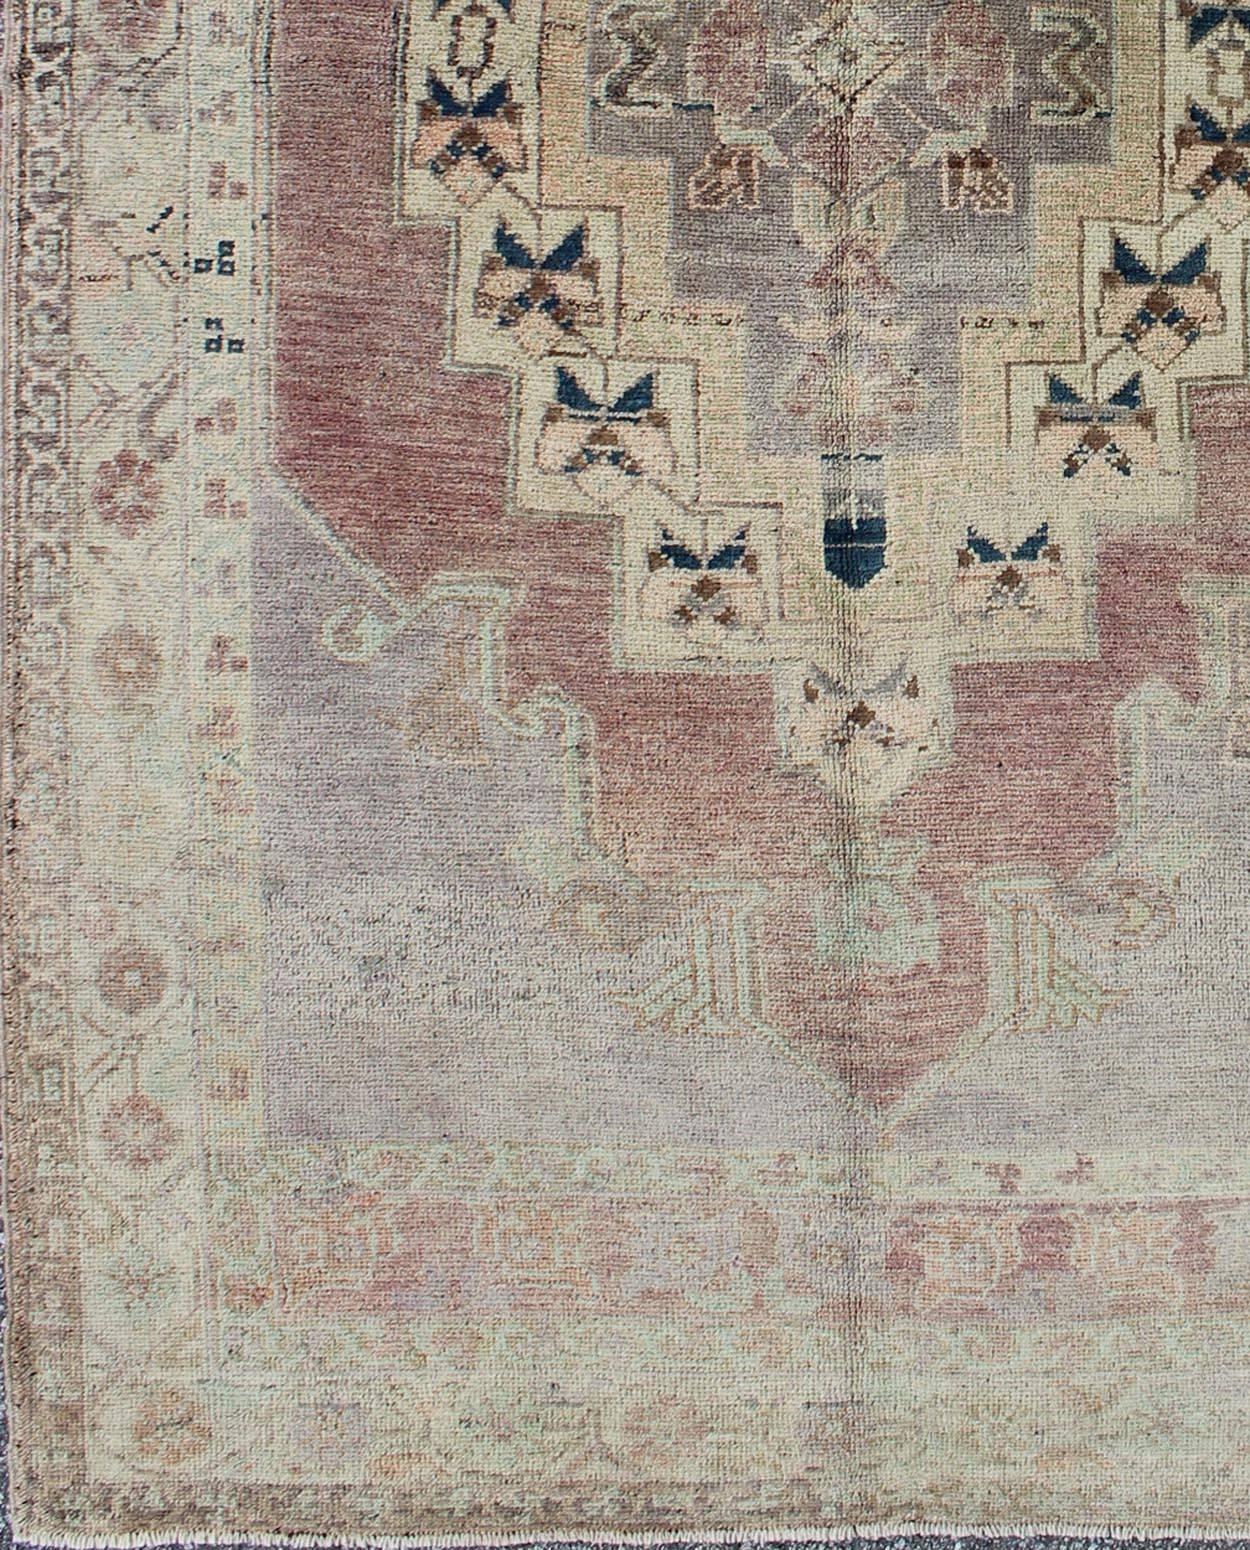 Layered geometric medallion vintage Turkish Oushak rug in cream, light purple, lavender, and gray colors, rug en-141543, country of origin / type: Turkey / Oushak, circa 1940

This vintage Turkish Oushak rug features an intricately beautiful